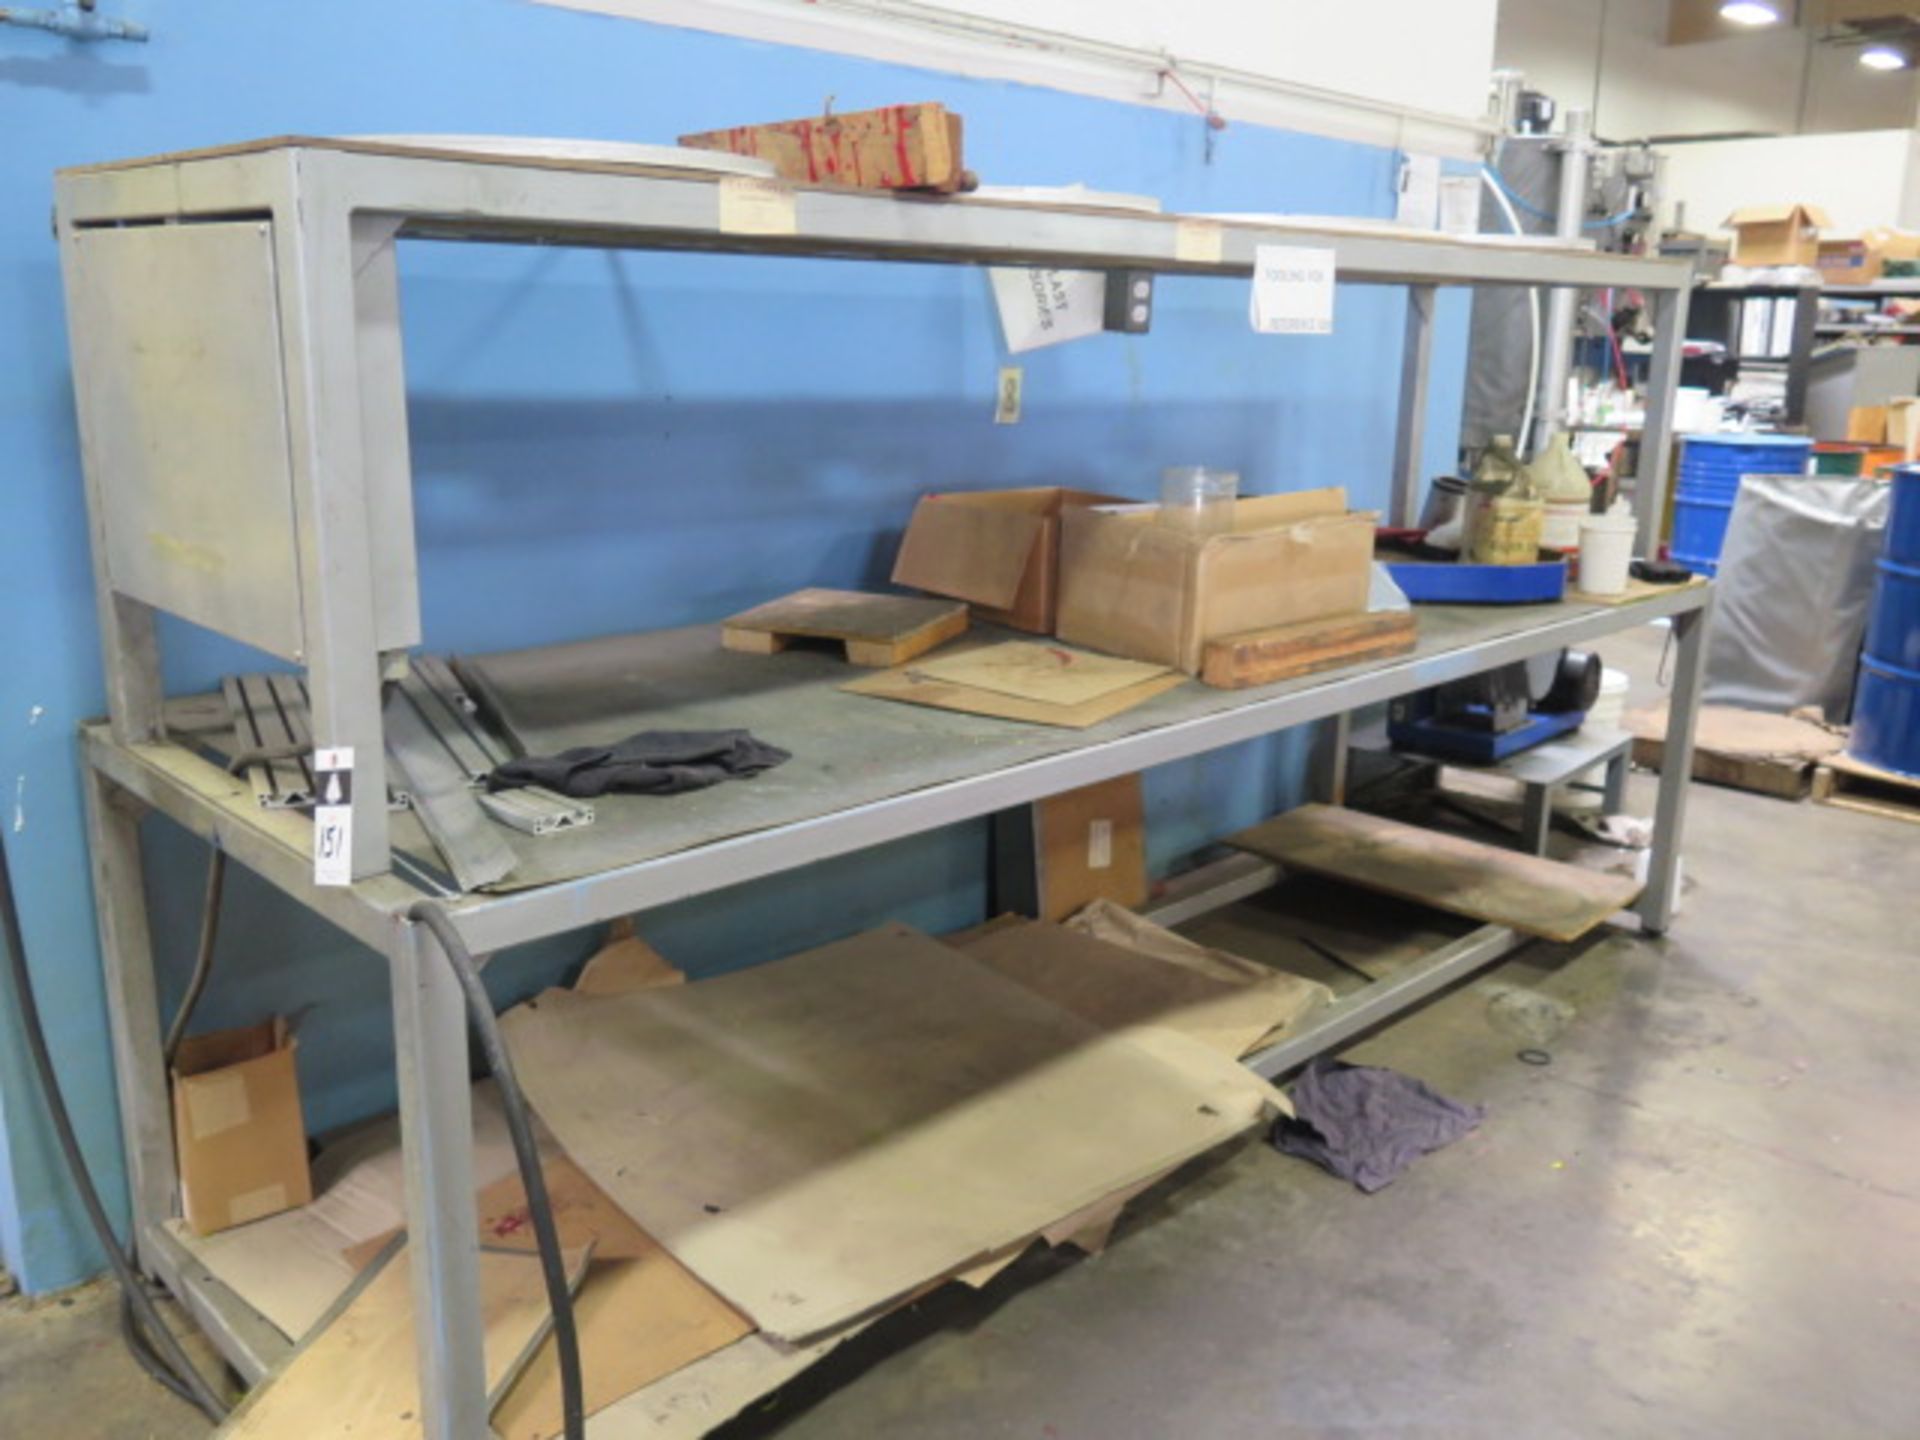 Steel Work Benches (SOLD AS-IS - NO WARRANTY)